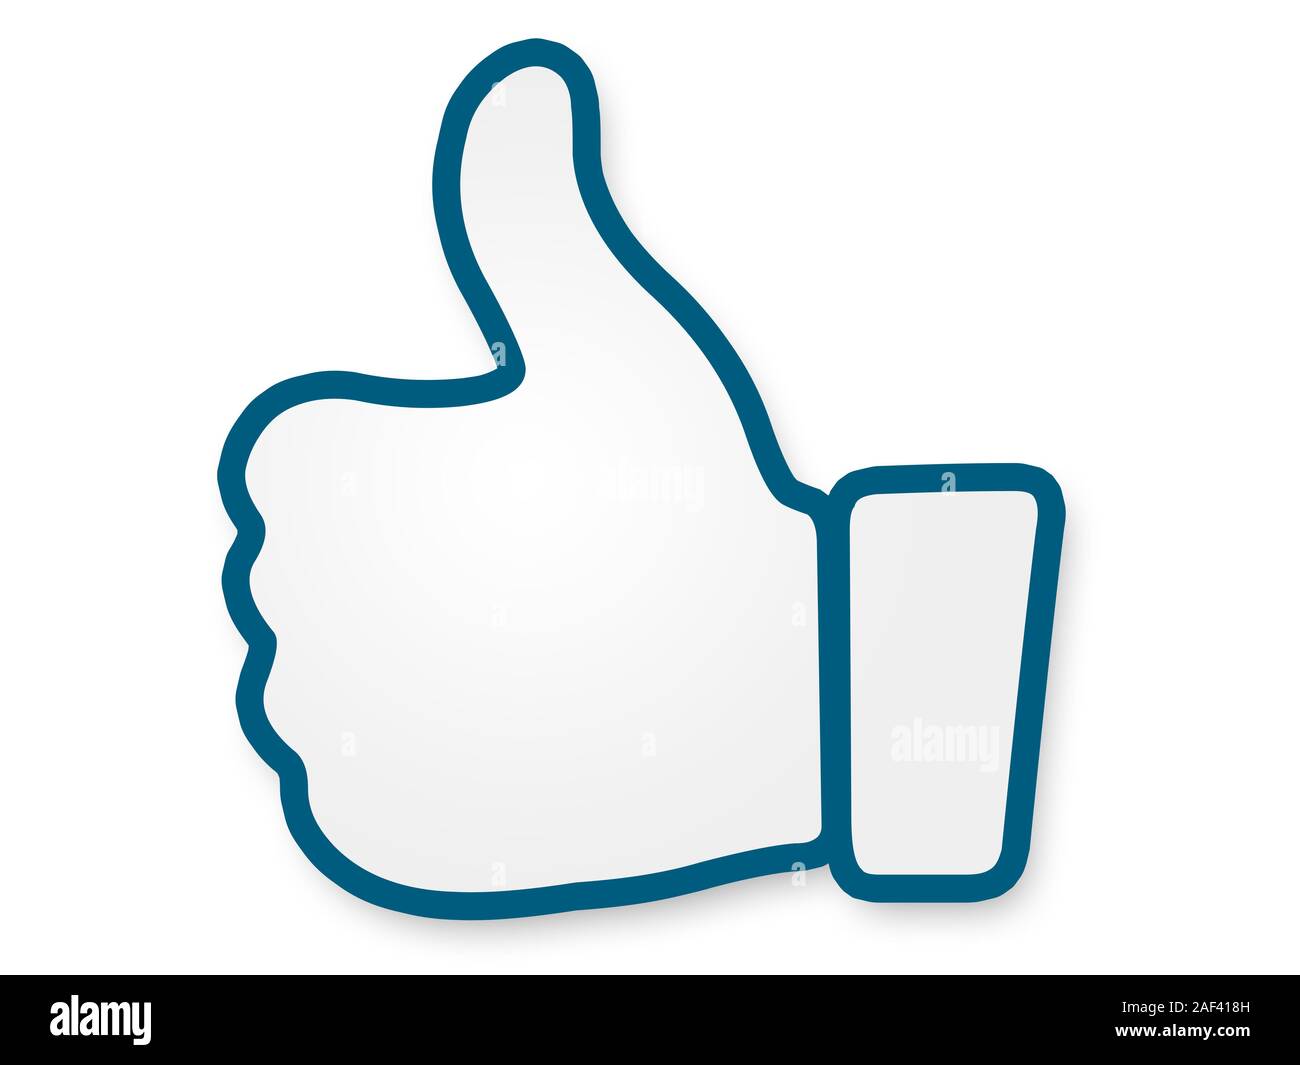 Thumbs Up Sign Banque D'Images